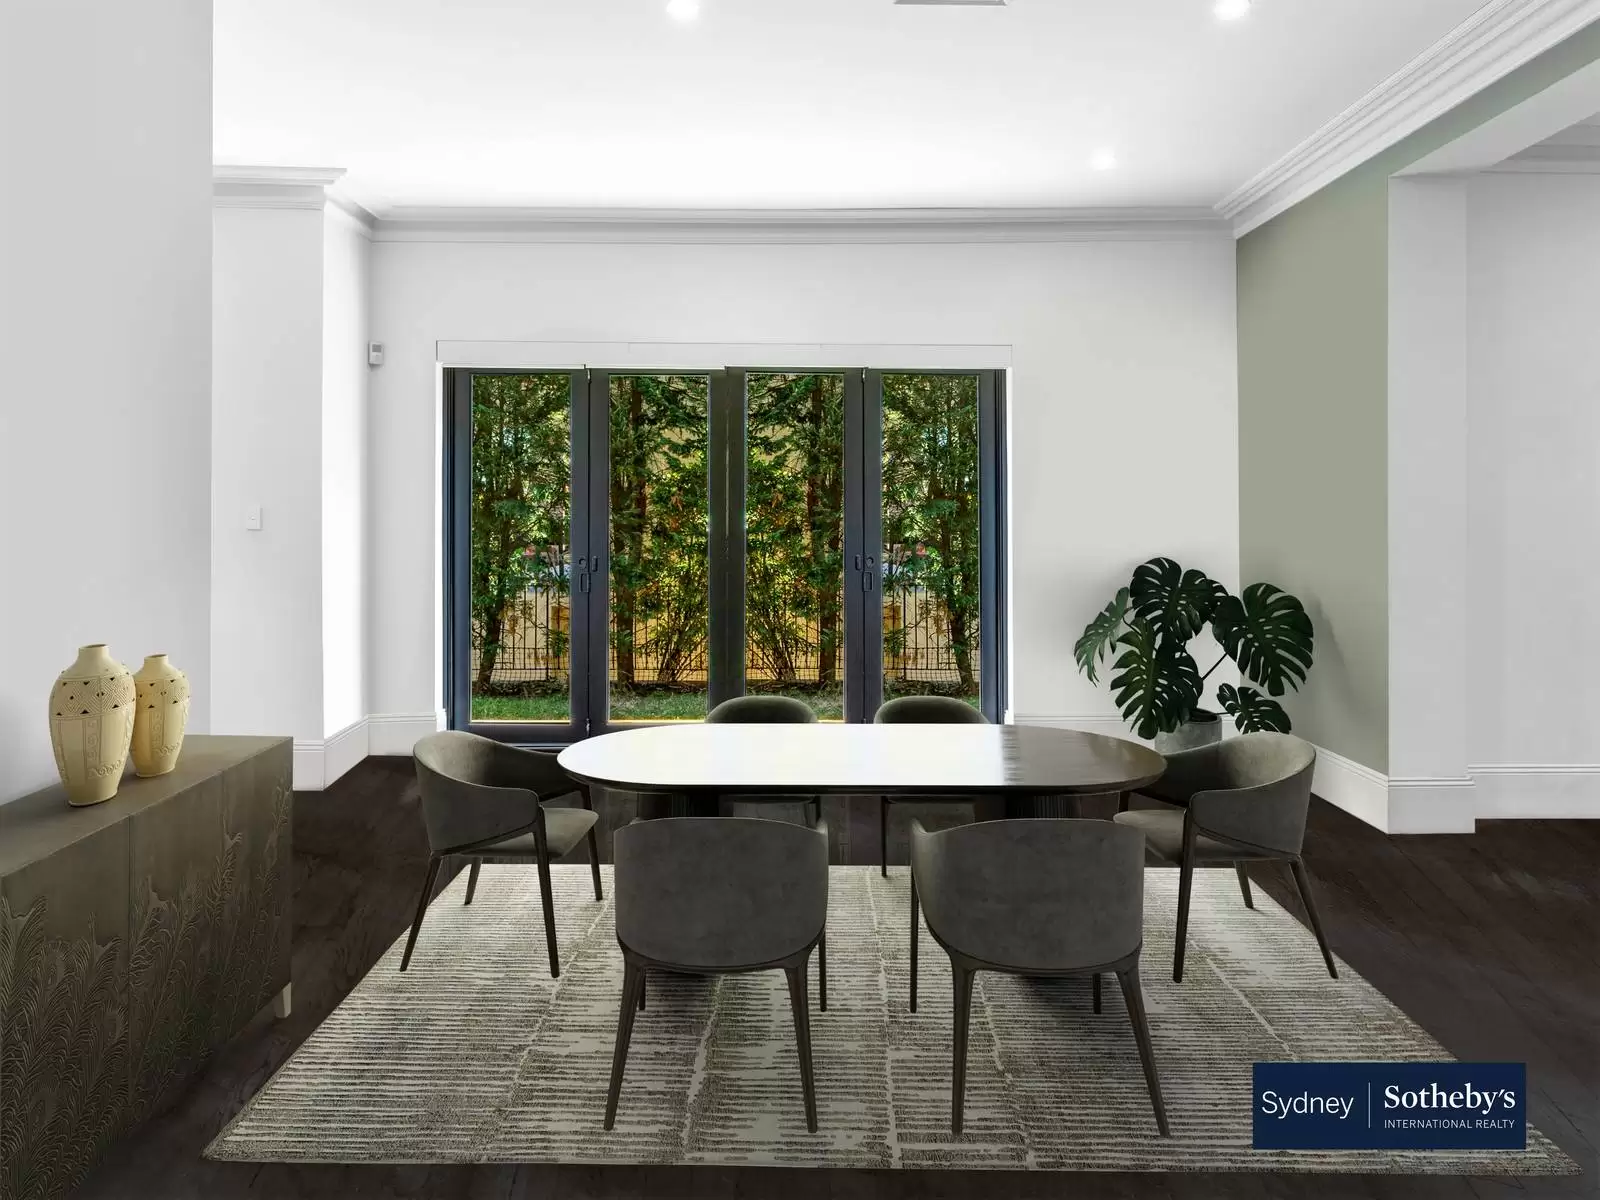 25 New South Head Road, Vaucluse Leased by Sydney Sotheby's International Realty - image 1